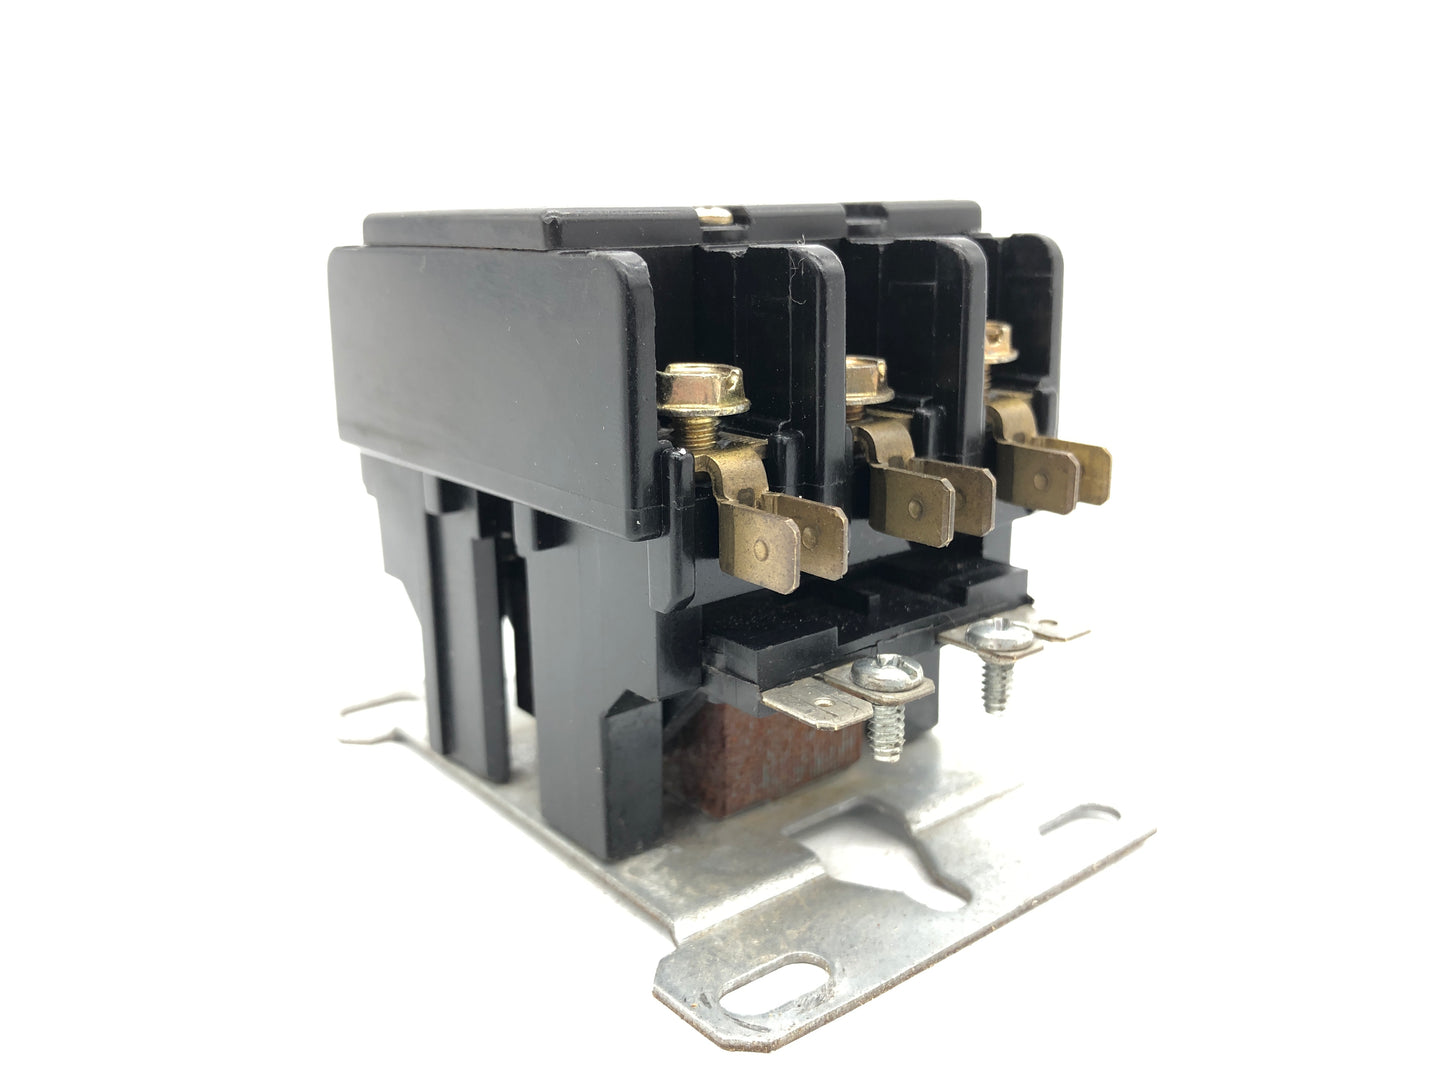 Arrow Hart ACC333UMM10 Magnetic Contactor 3 pole 30 Amp - Reconditioned